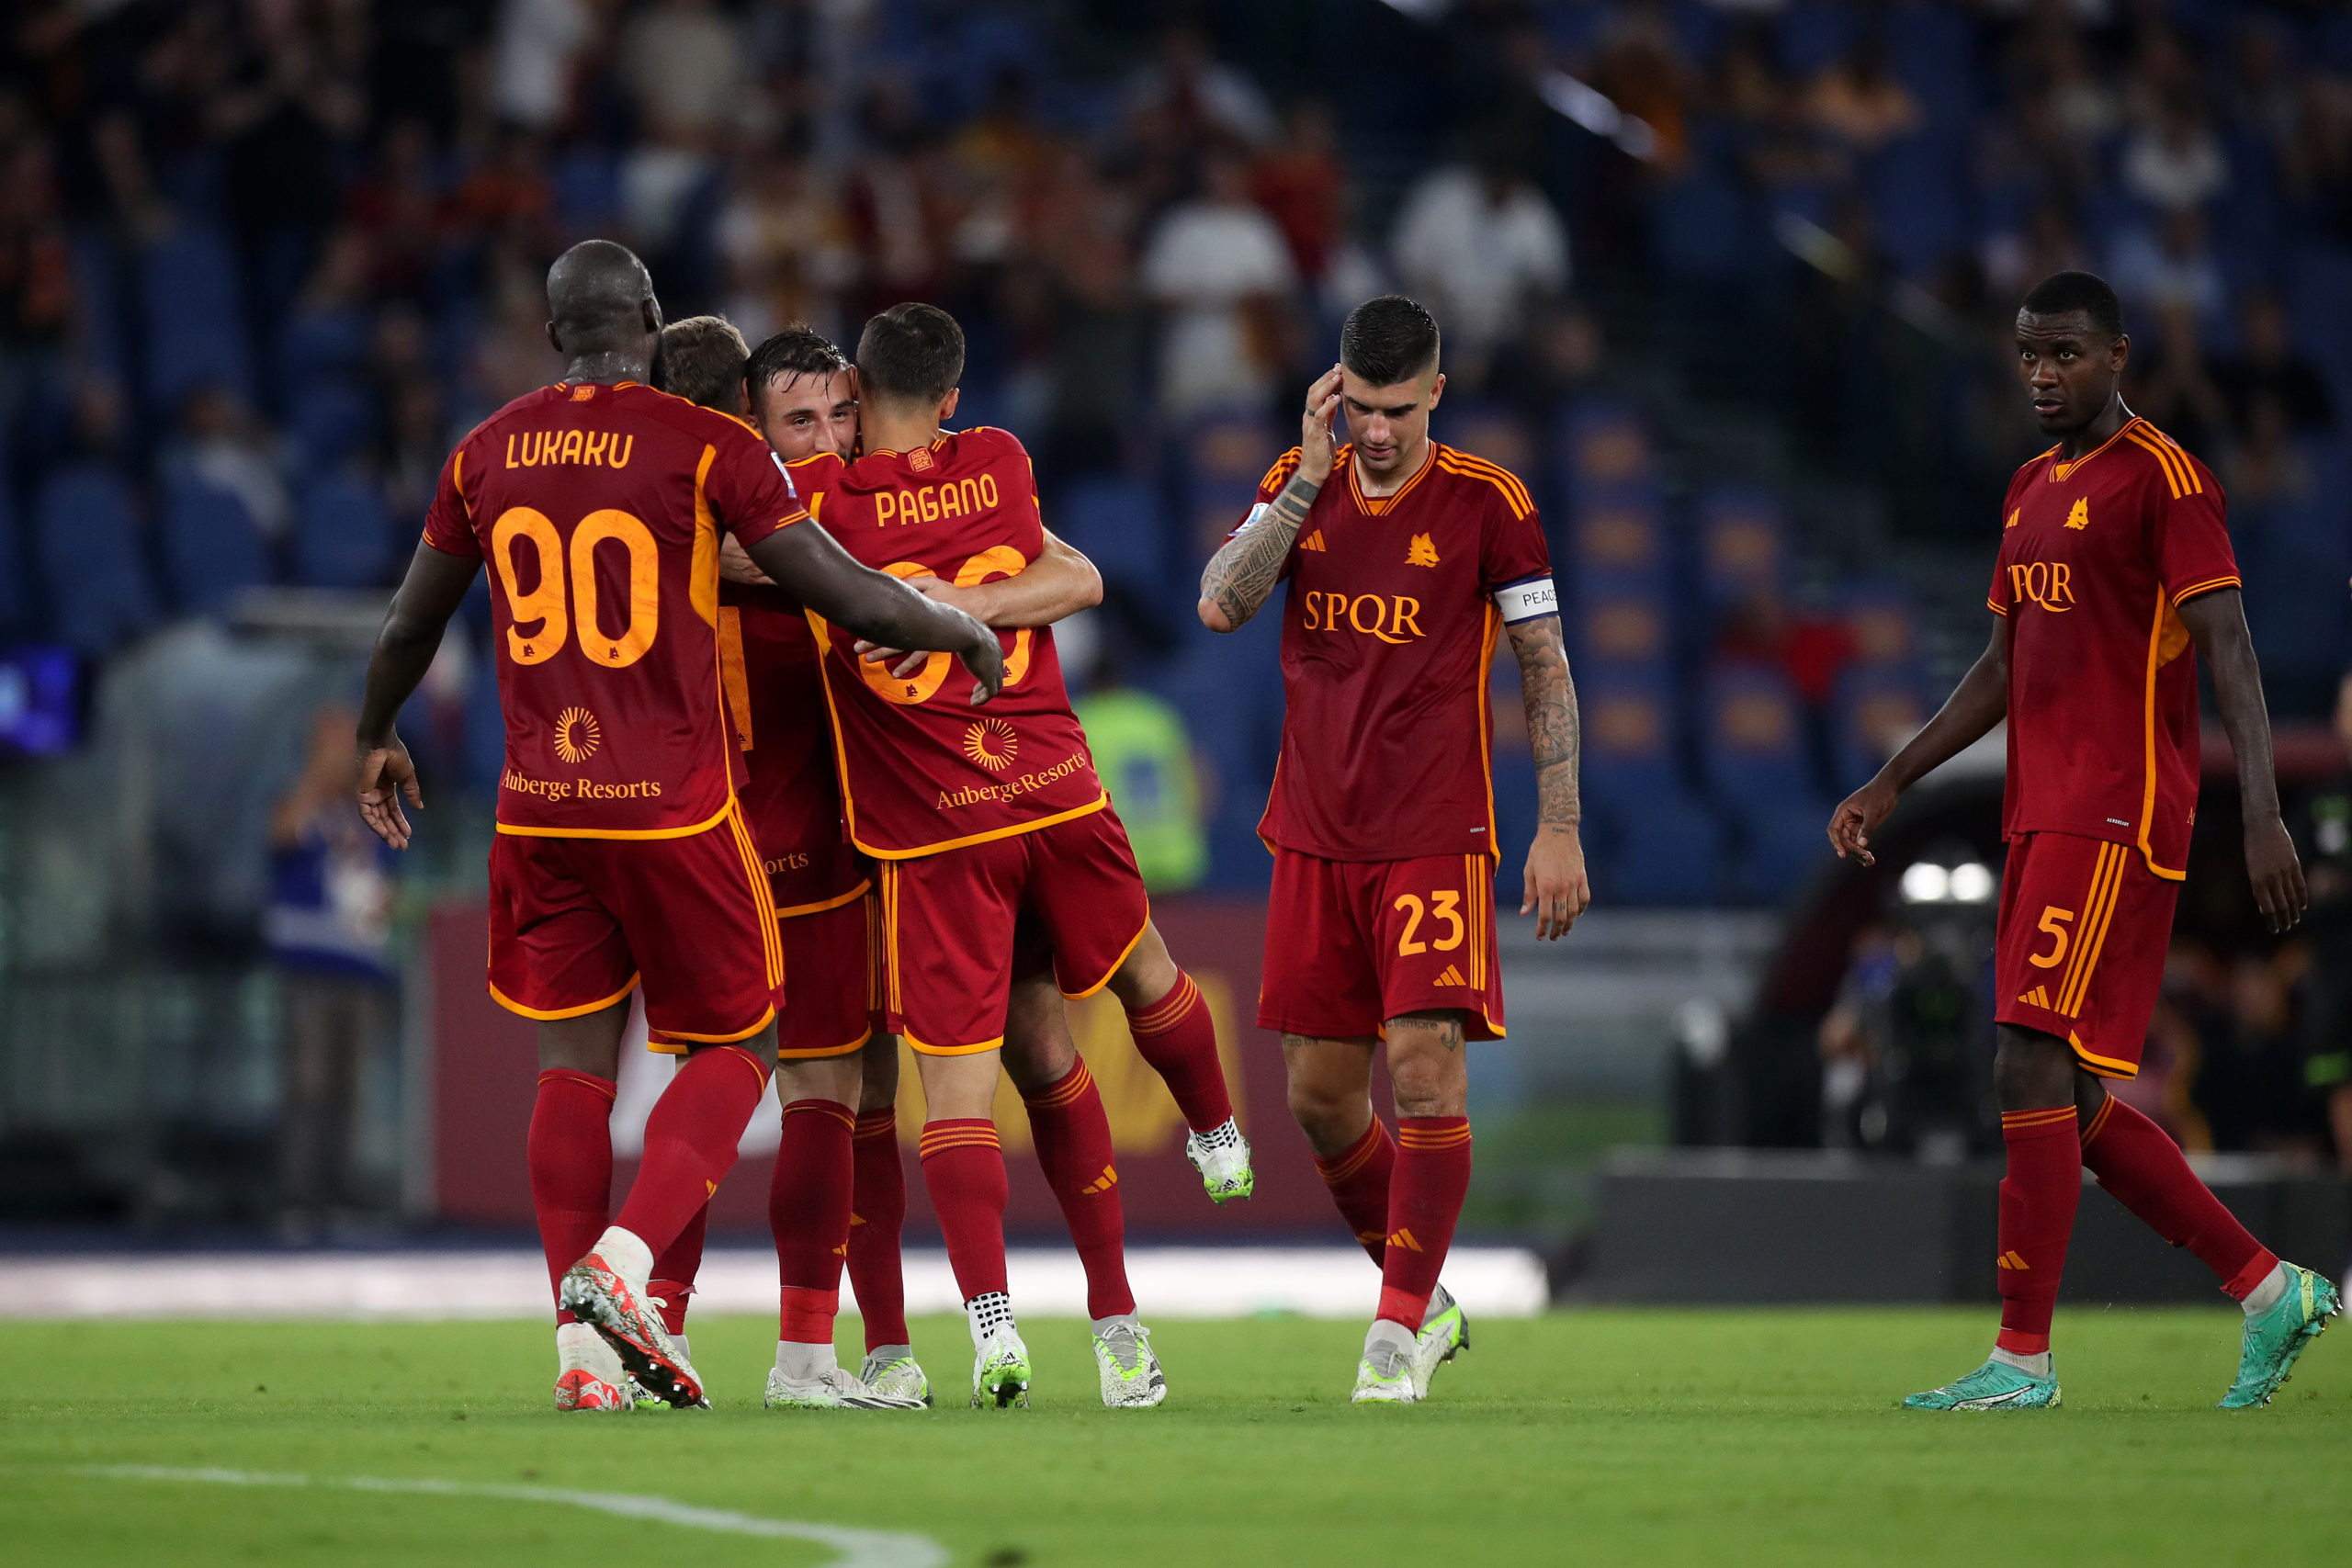 Roma have had a less than an ideal start to the 2023/24 season. Jose Mourinho’s defense has not operated to the optimum levels they are capable of.